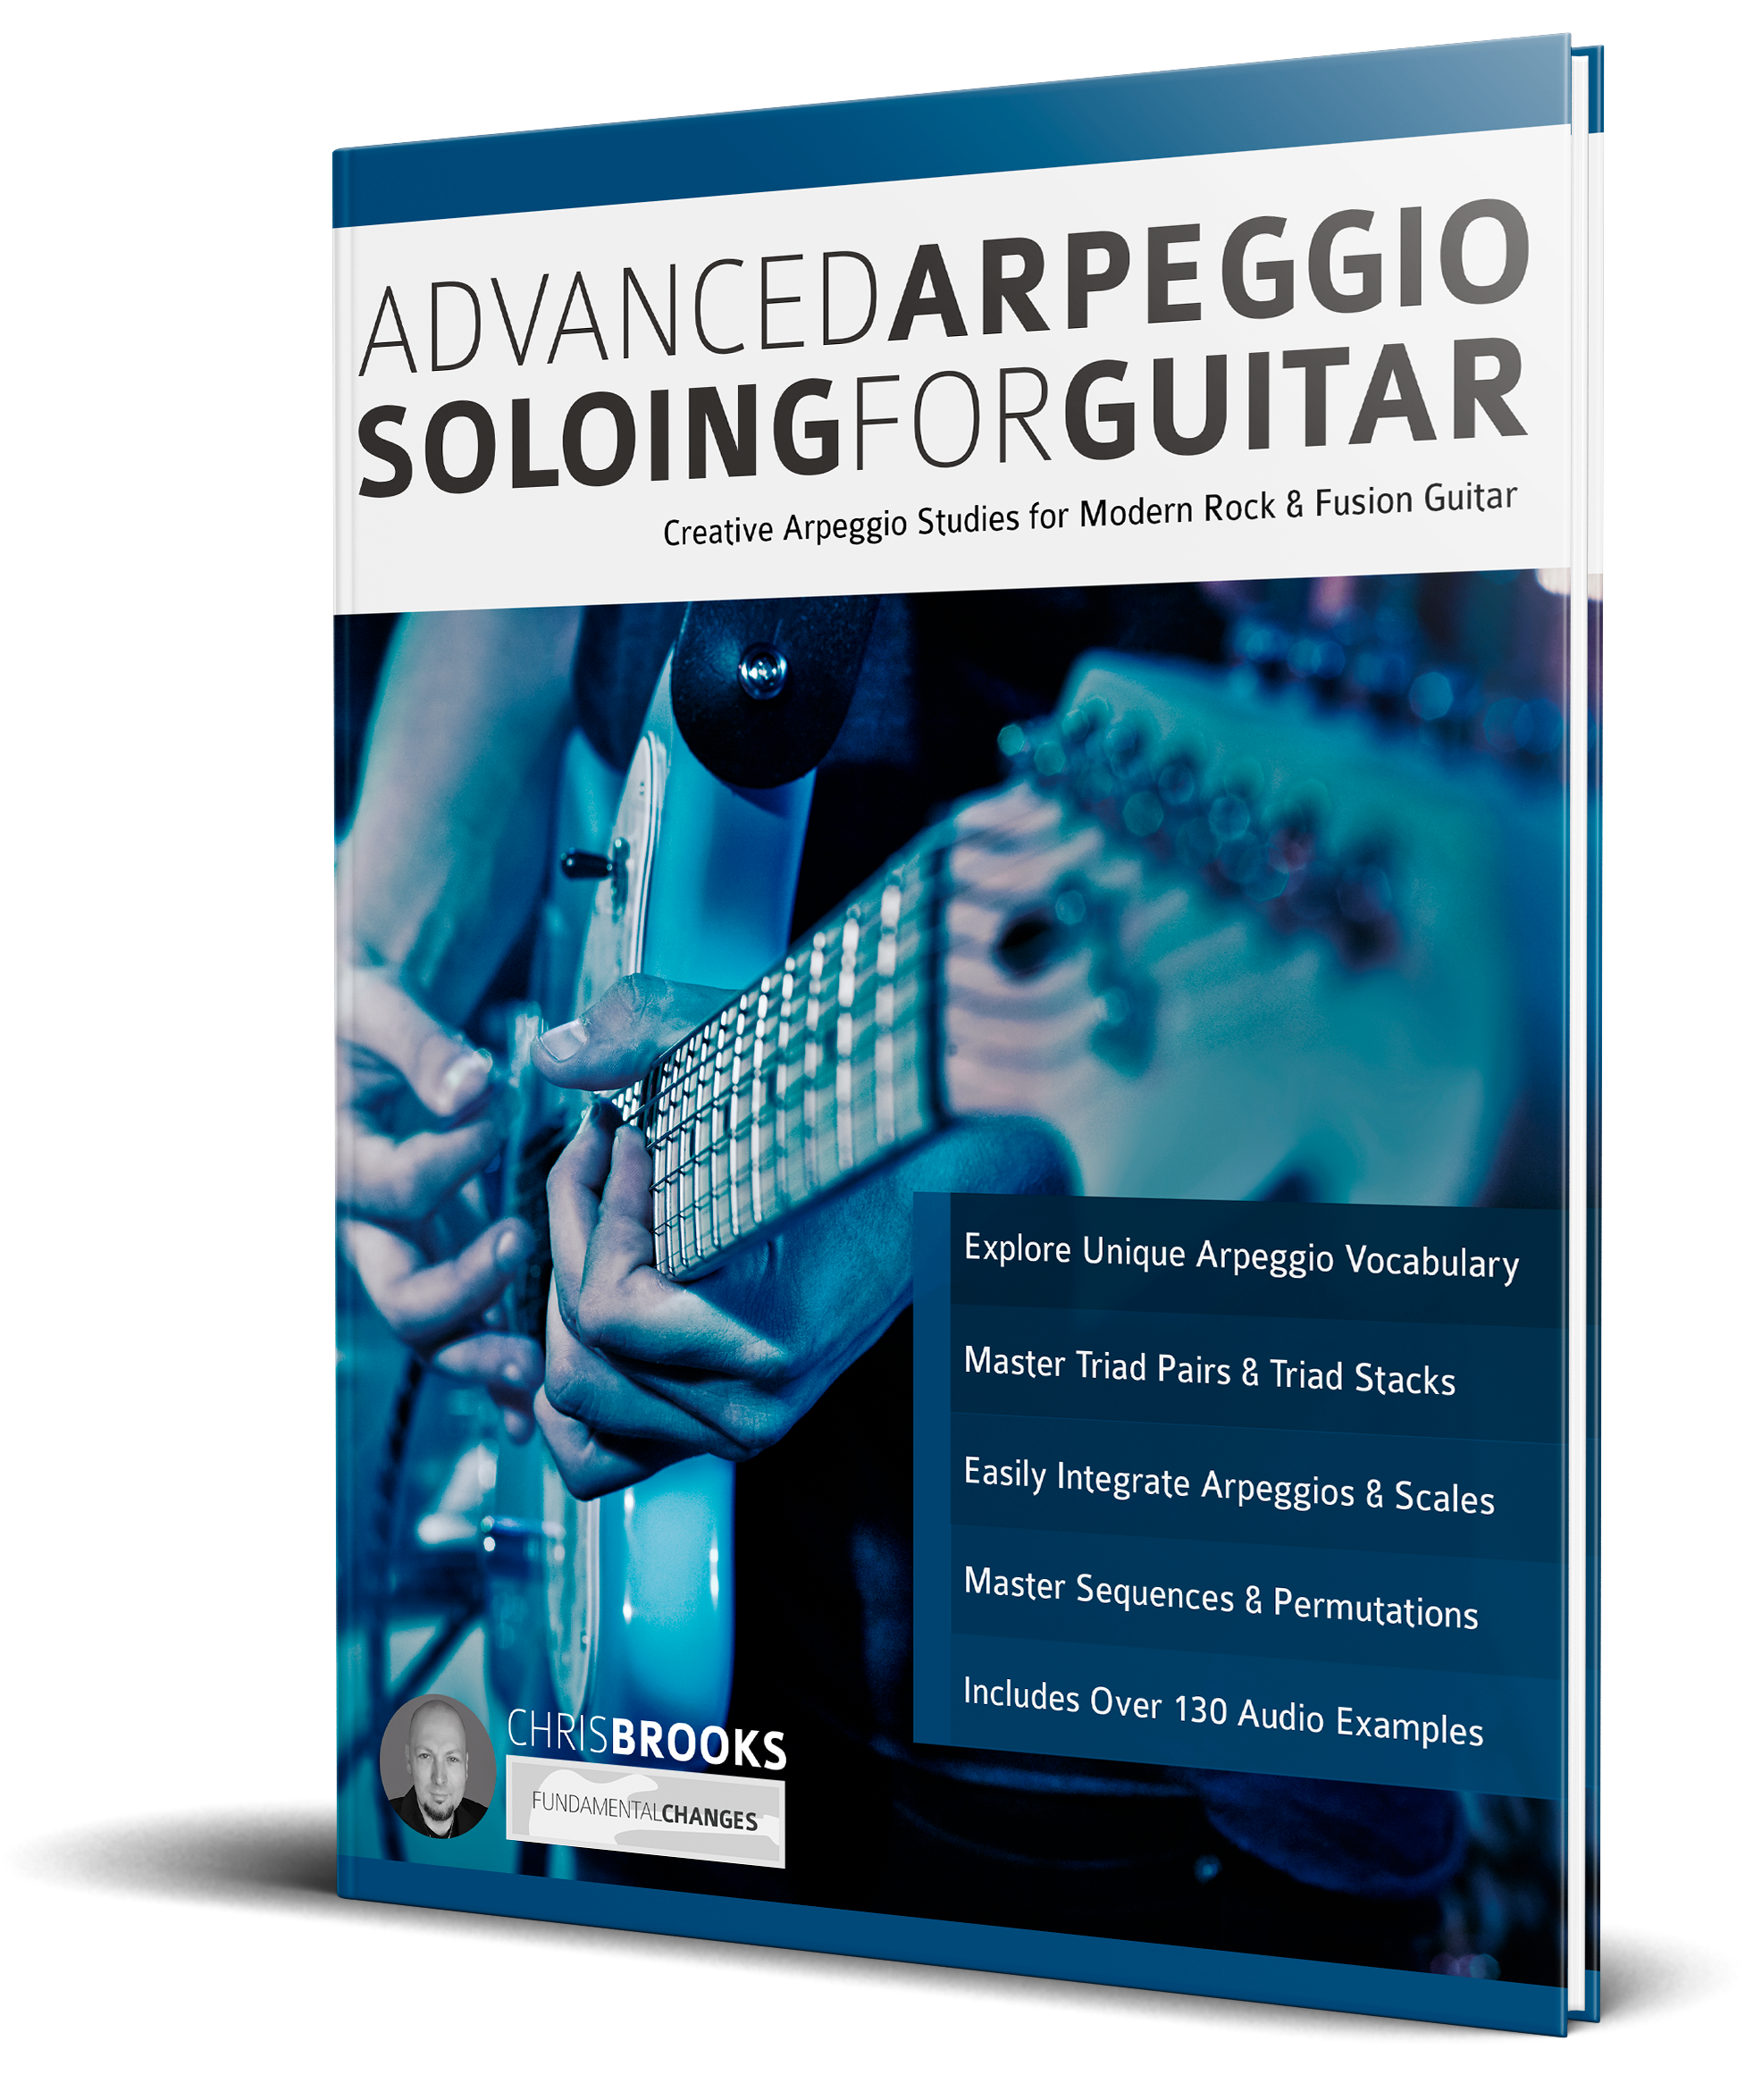 Advanced Arpeggio Soloing for Guitar by Chris Brooks